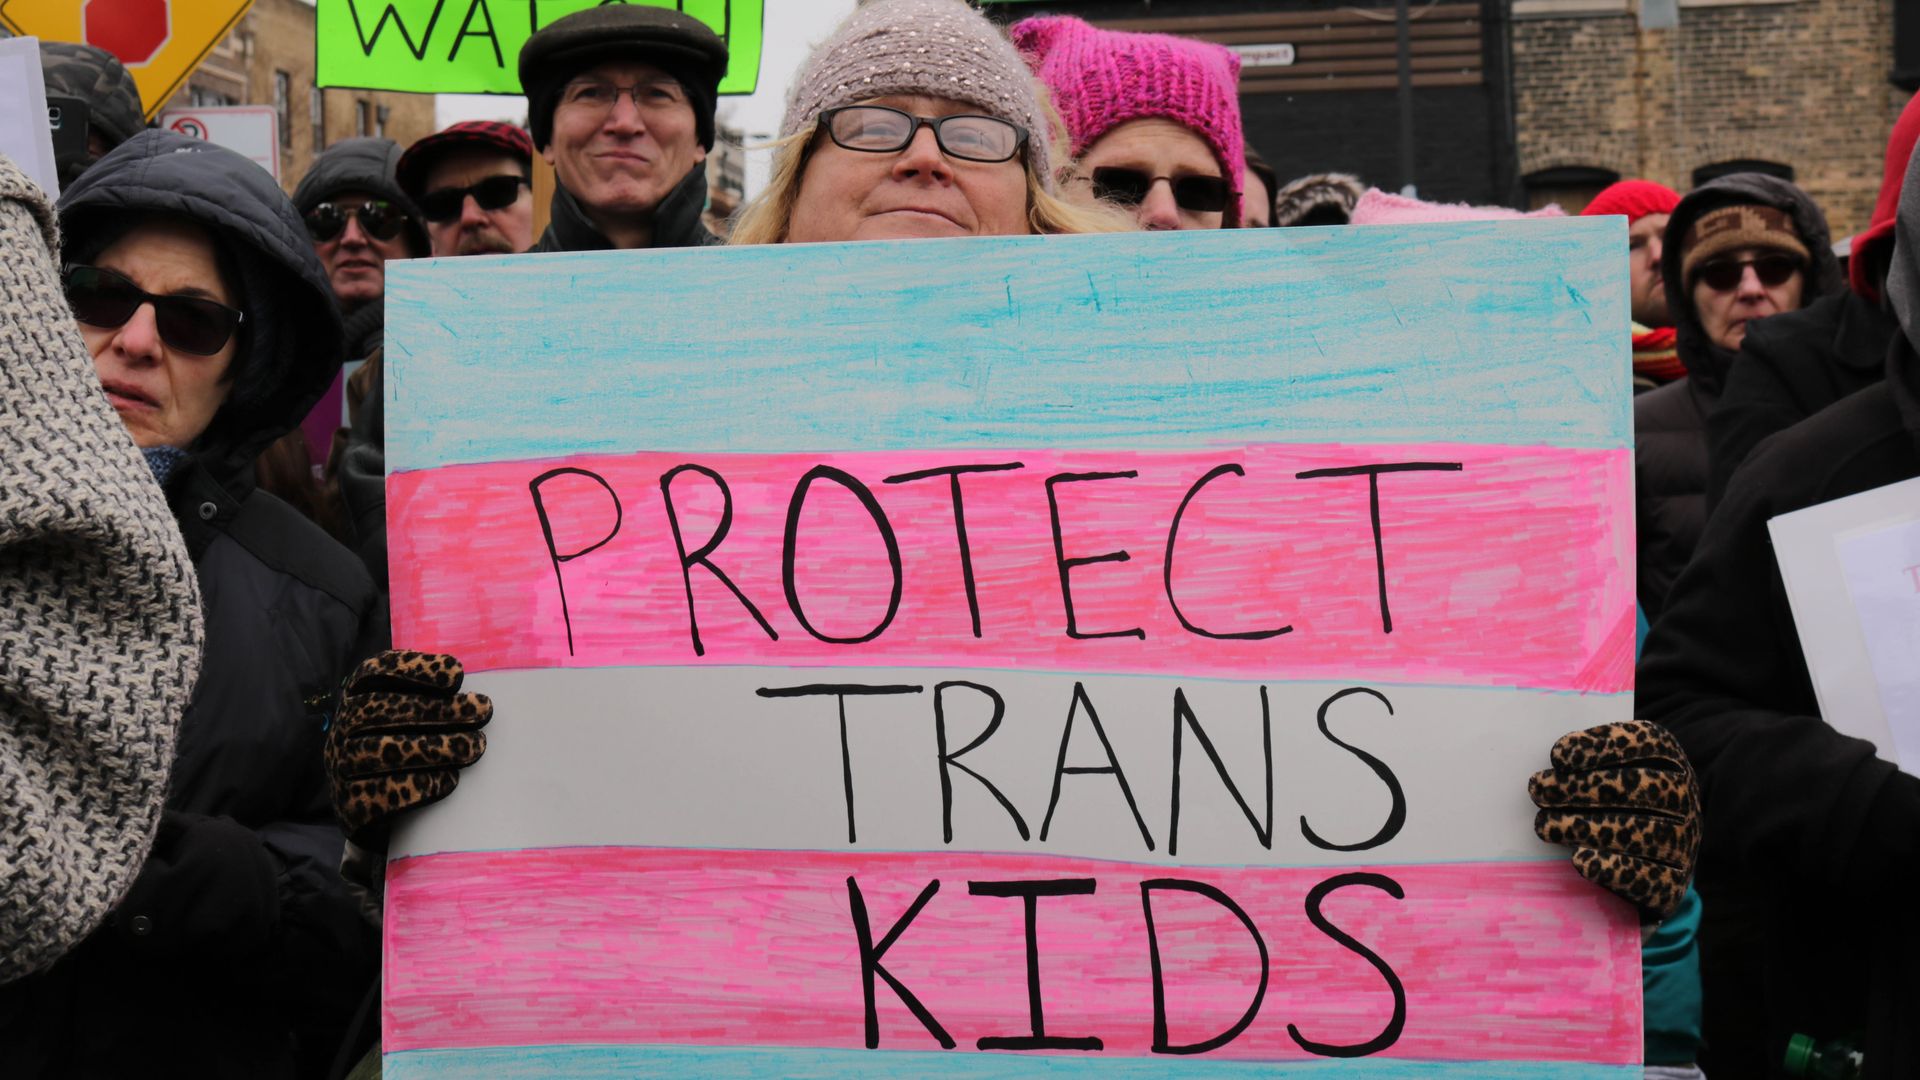 Picture of a sign that says "Protect trans kids"